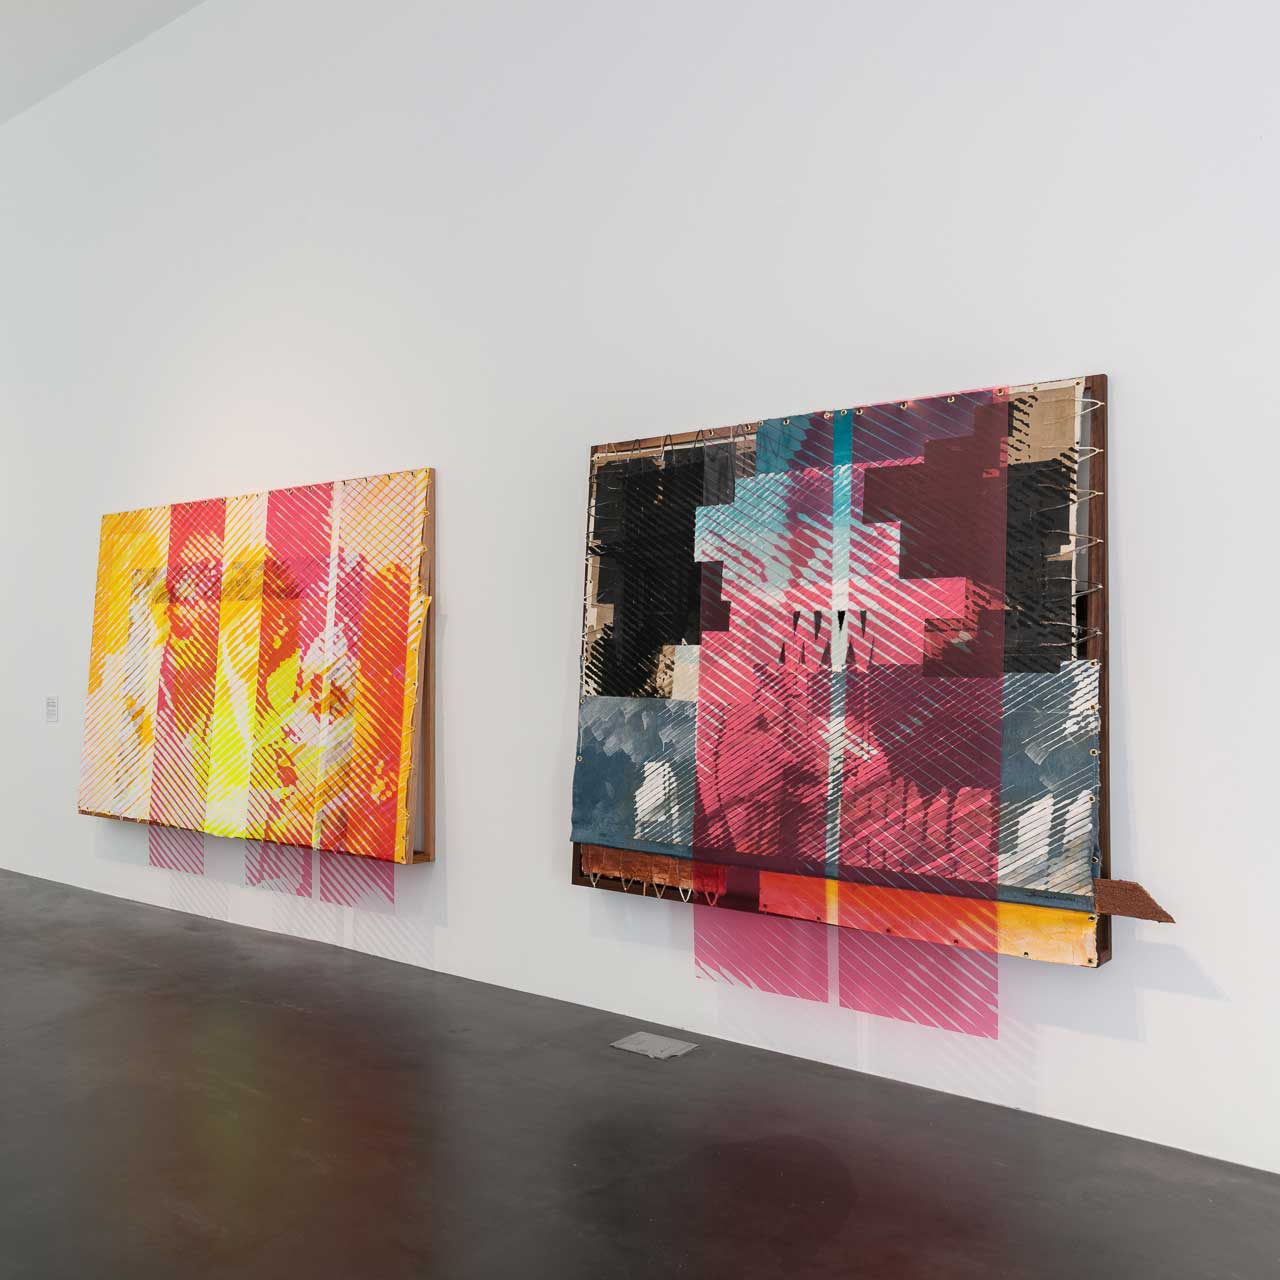 Two large, colorful abstract artworks hung on a white gallery wall.